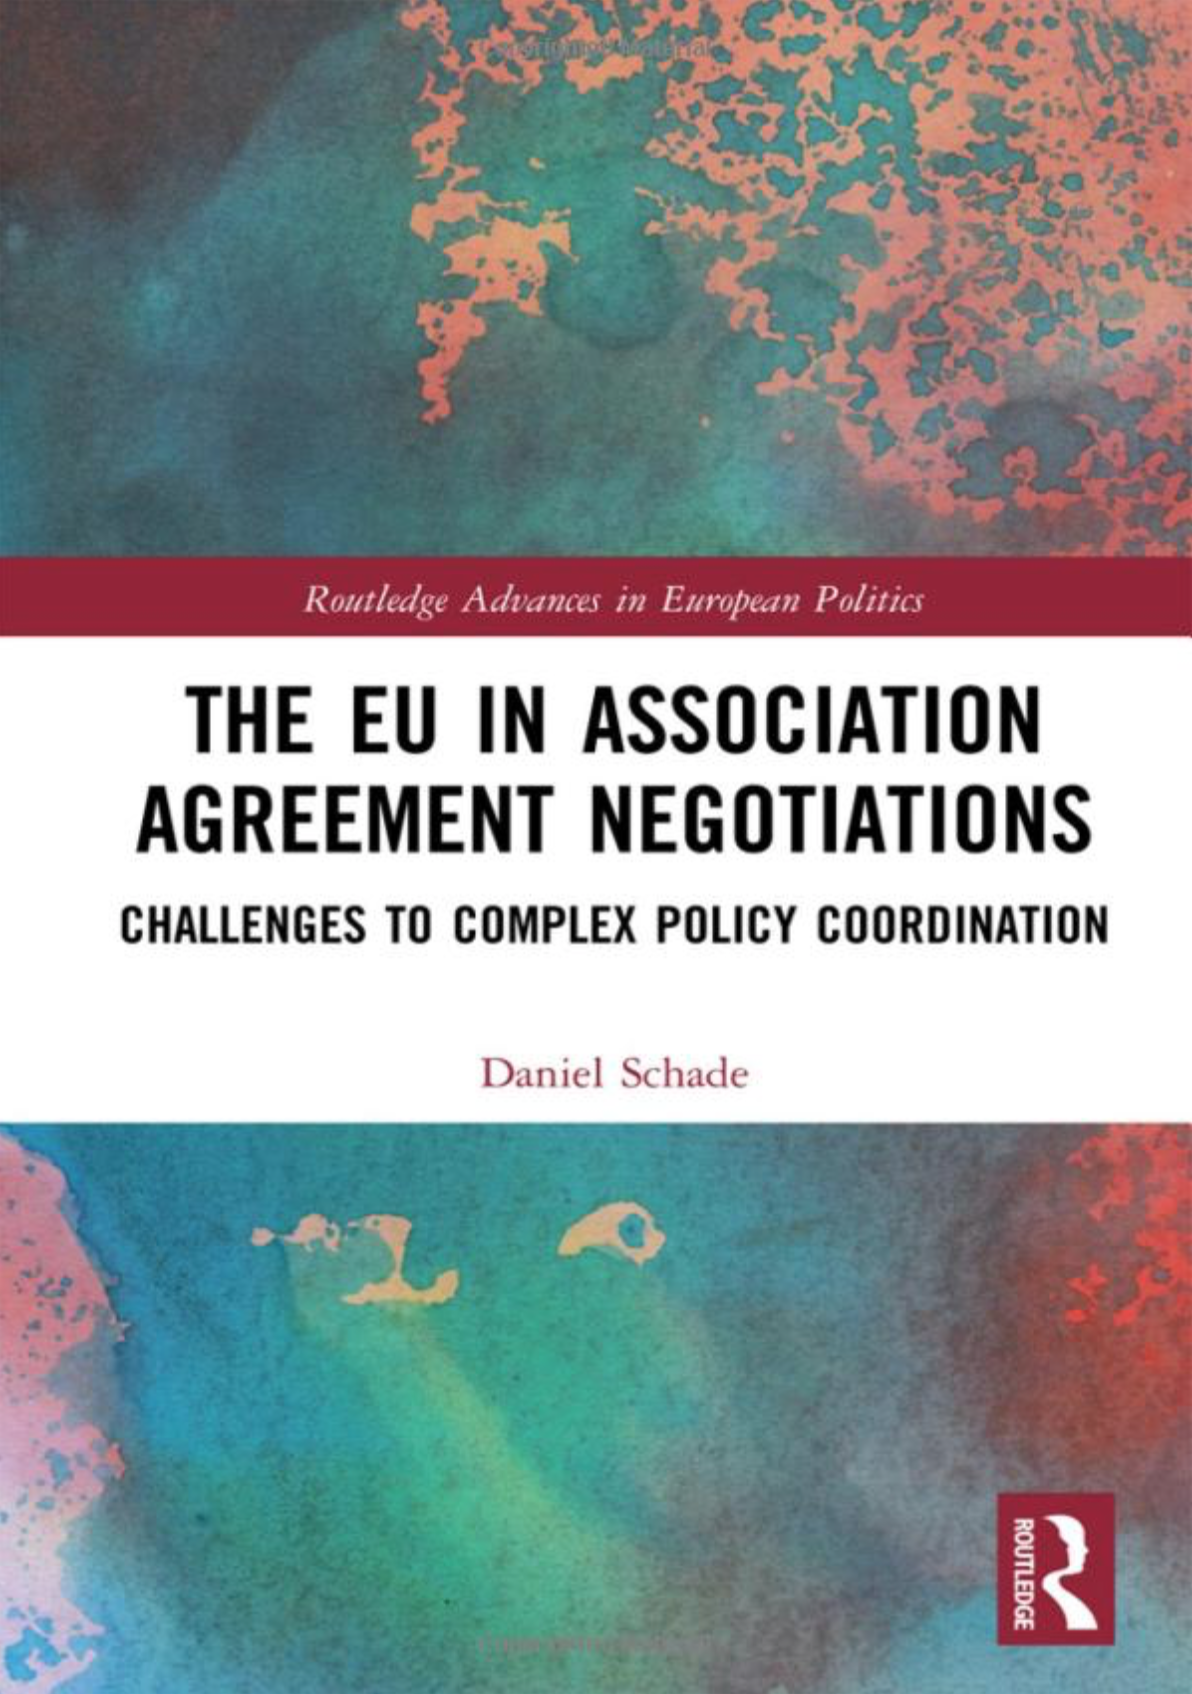 The EU in Association Agreement Negotiations cover